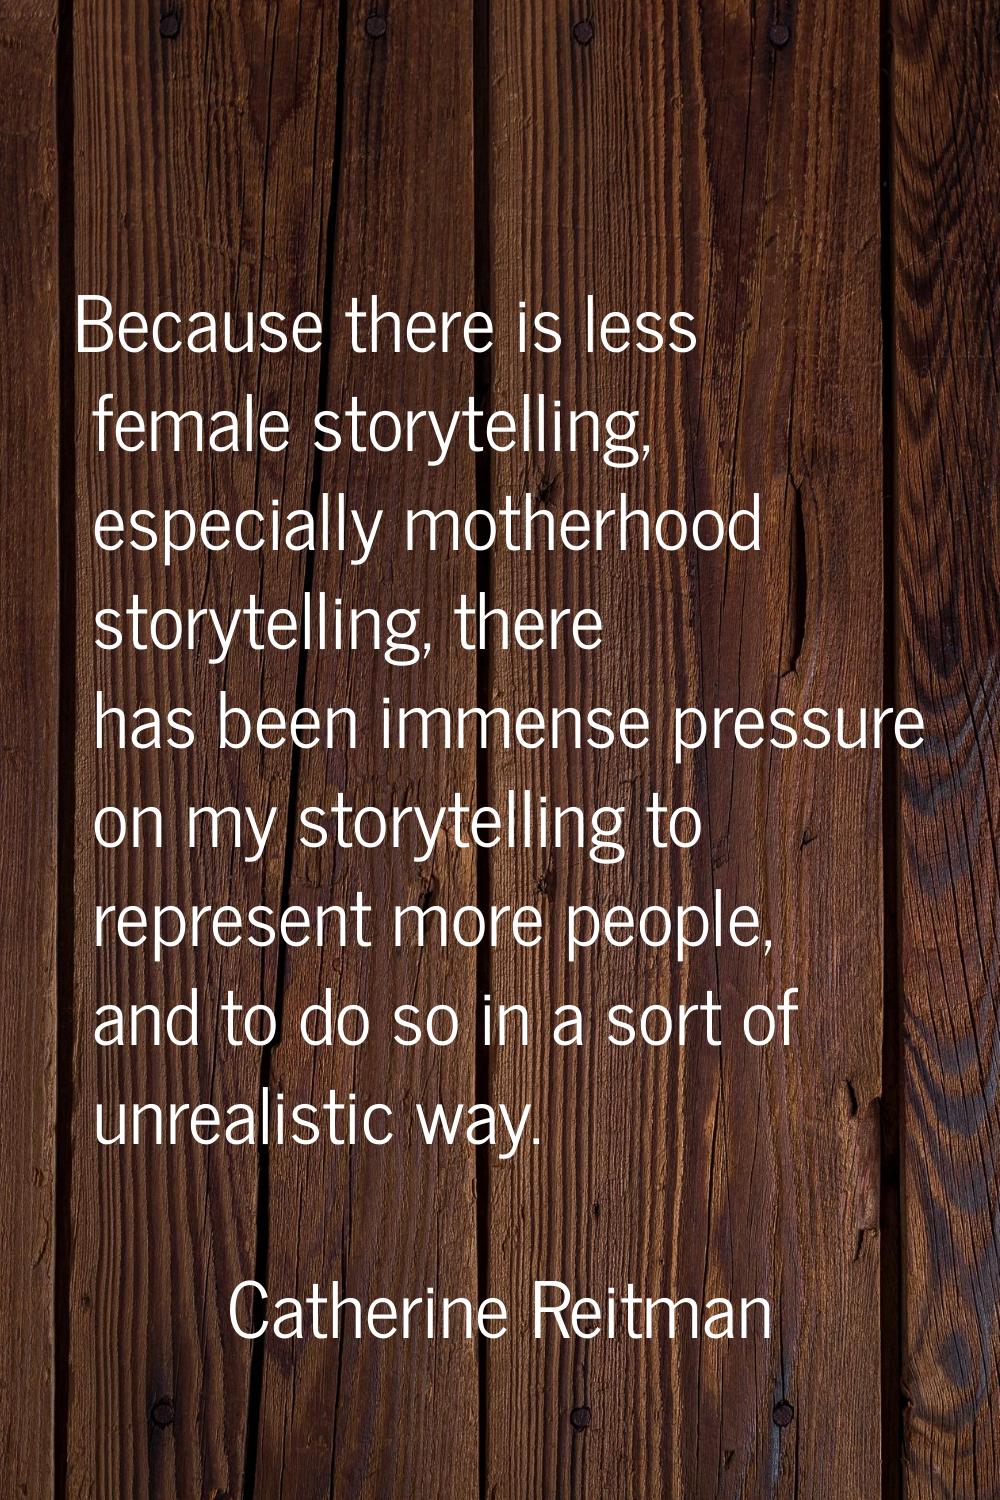 Because there is less female storytelling, especially motherhood storytelling, there has been immen